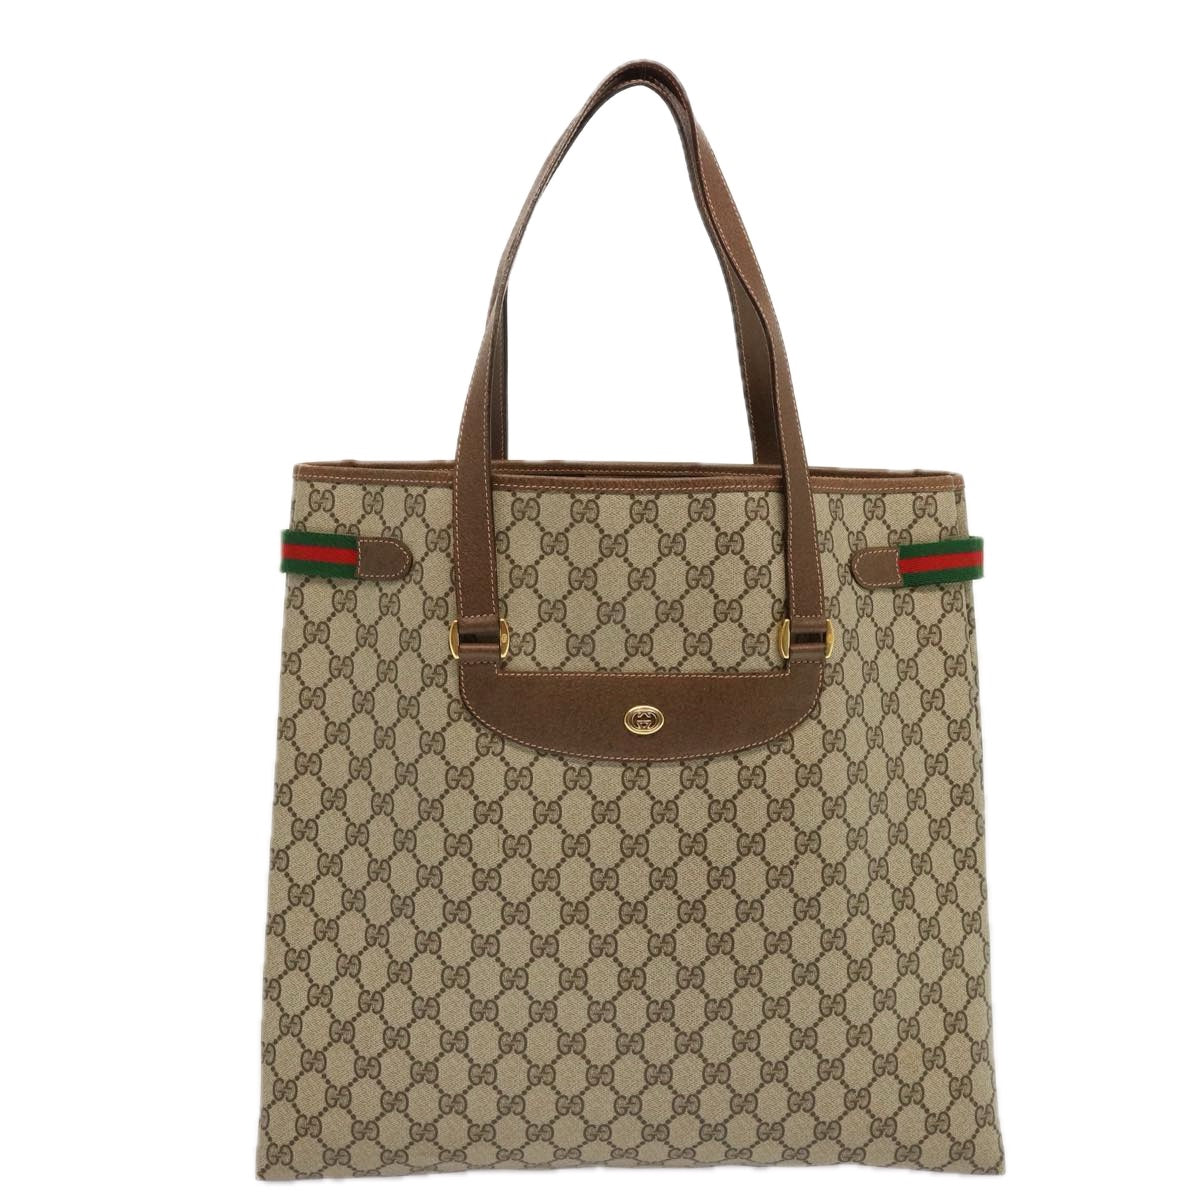 GUCCI GG Supreme Web Sherry Line Tote Bag PVC Beige Red 39 02 091 Auth ep3766